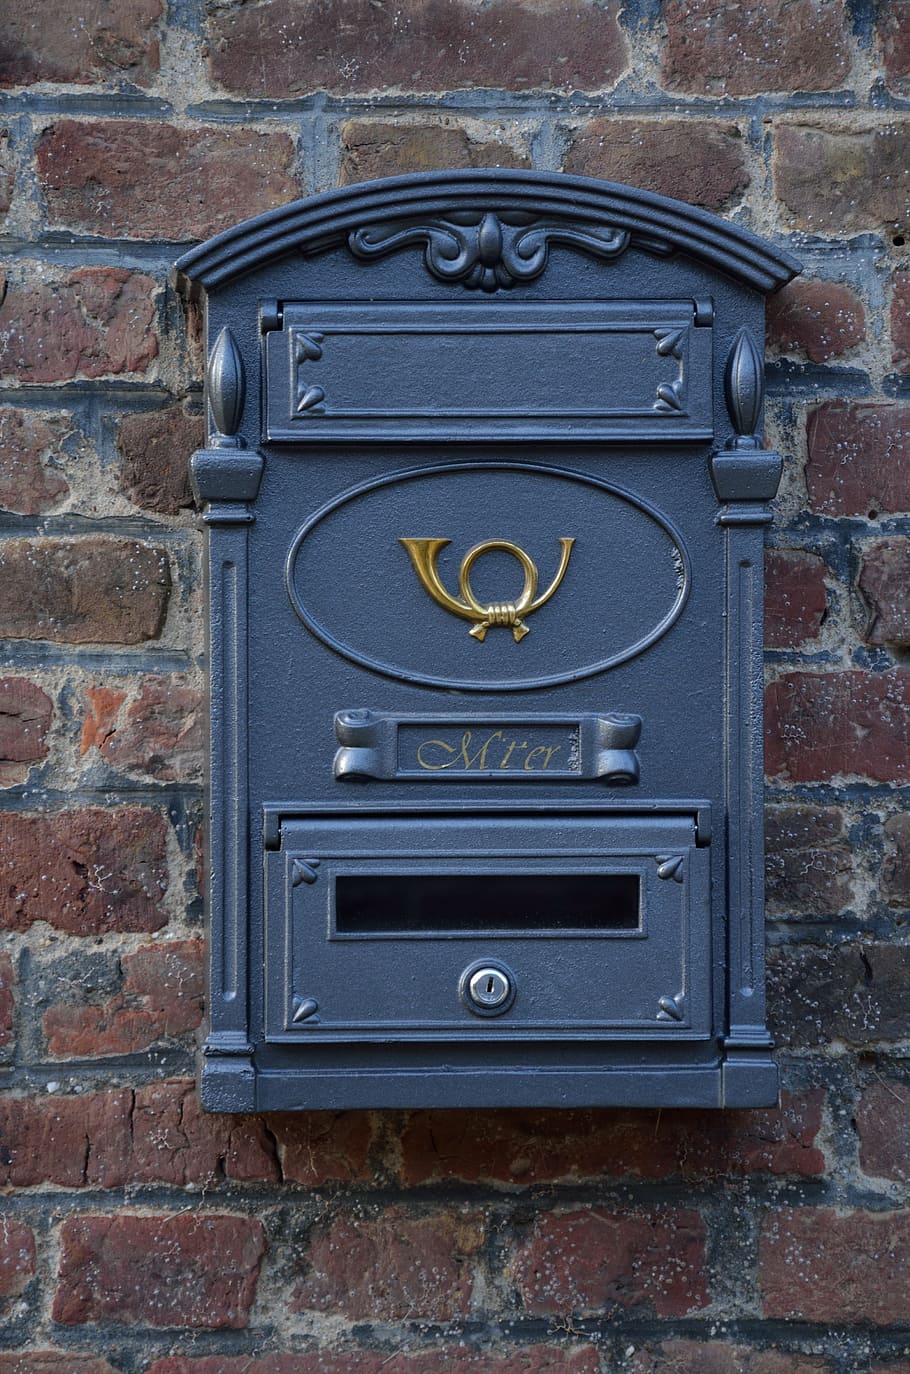 blue, metal mailbox, mounted, concrete, brick wall, mailbox, post, post horn, letter boxes, brick